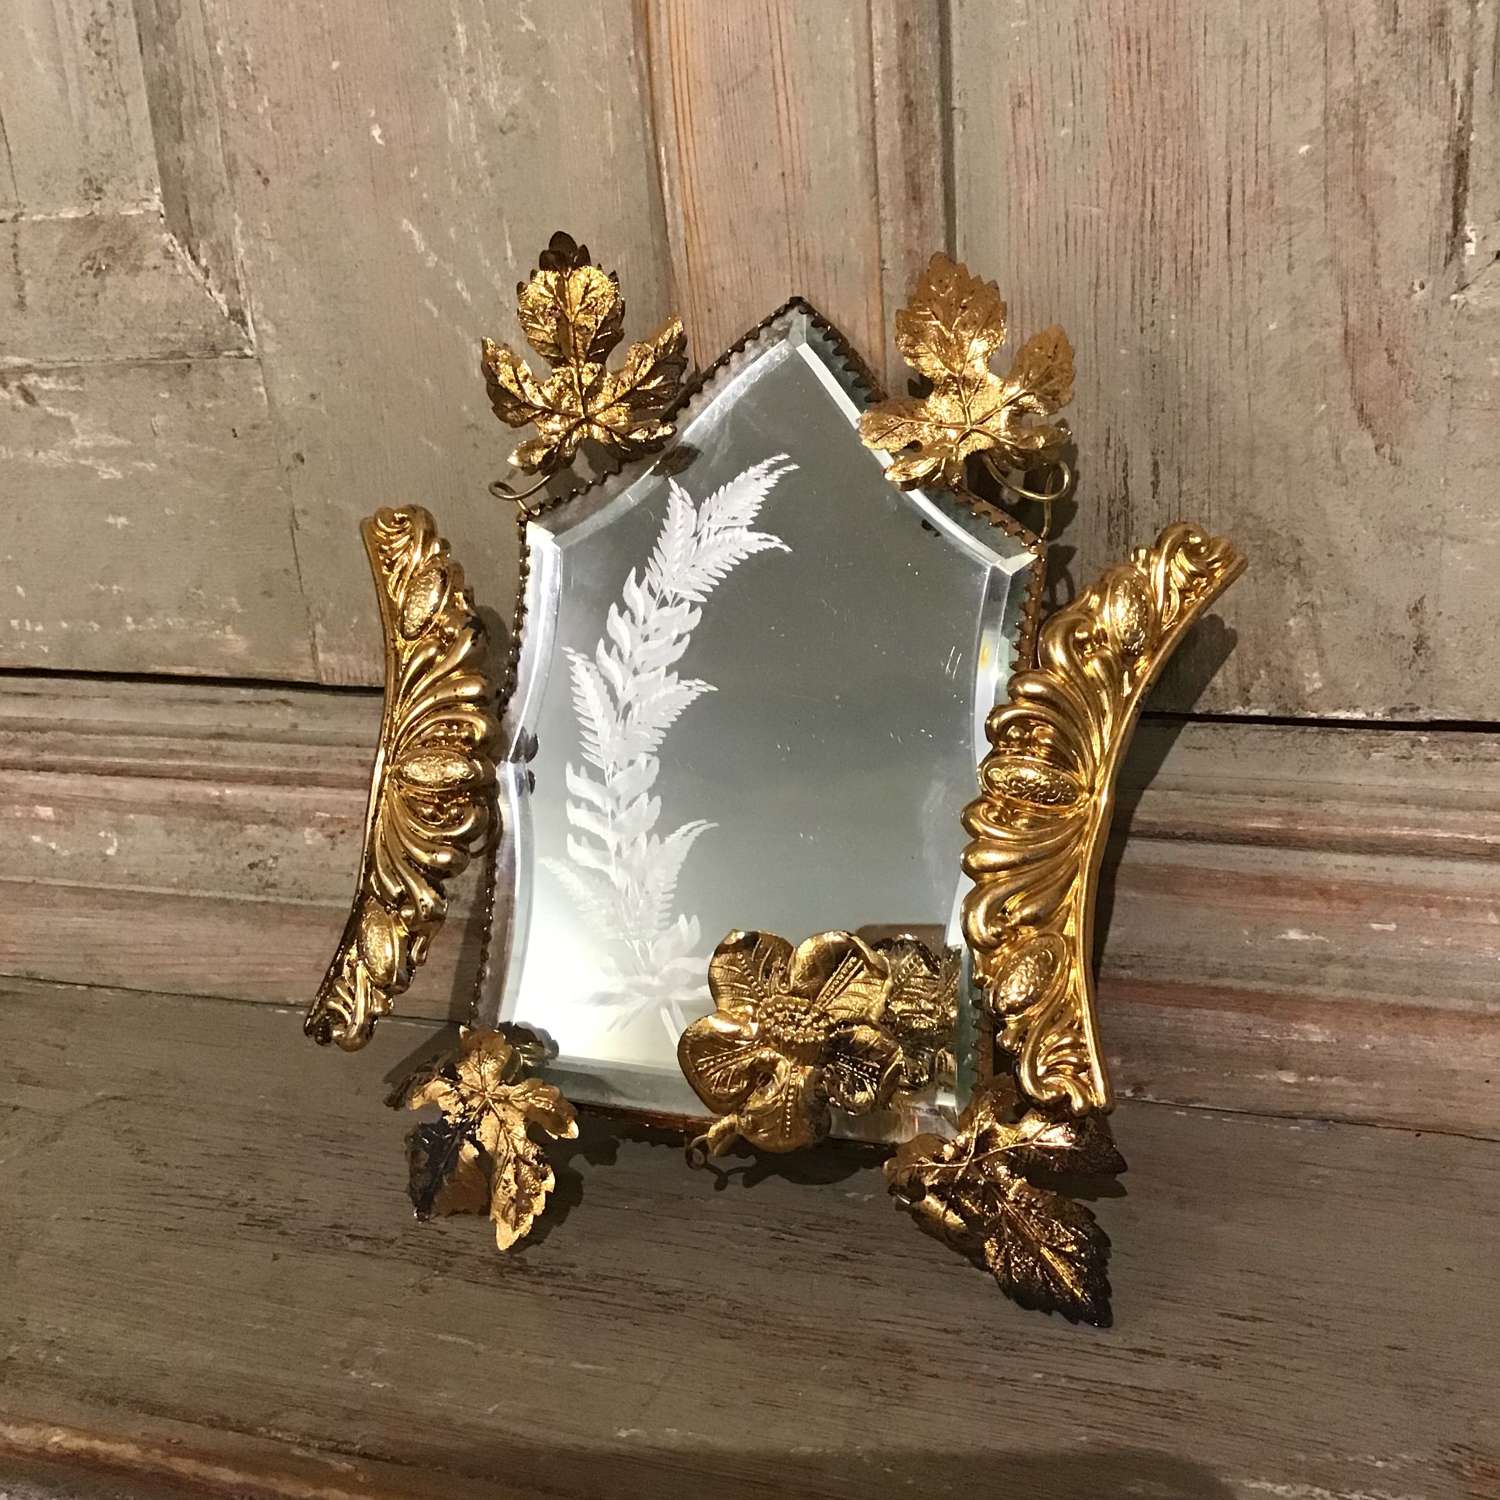 Antique decorative mirrored piece from French marriage dome